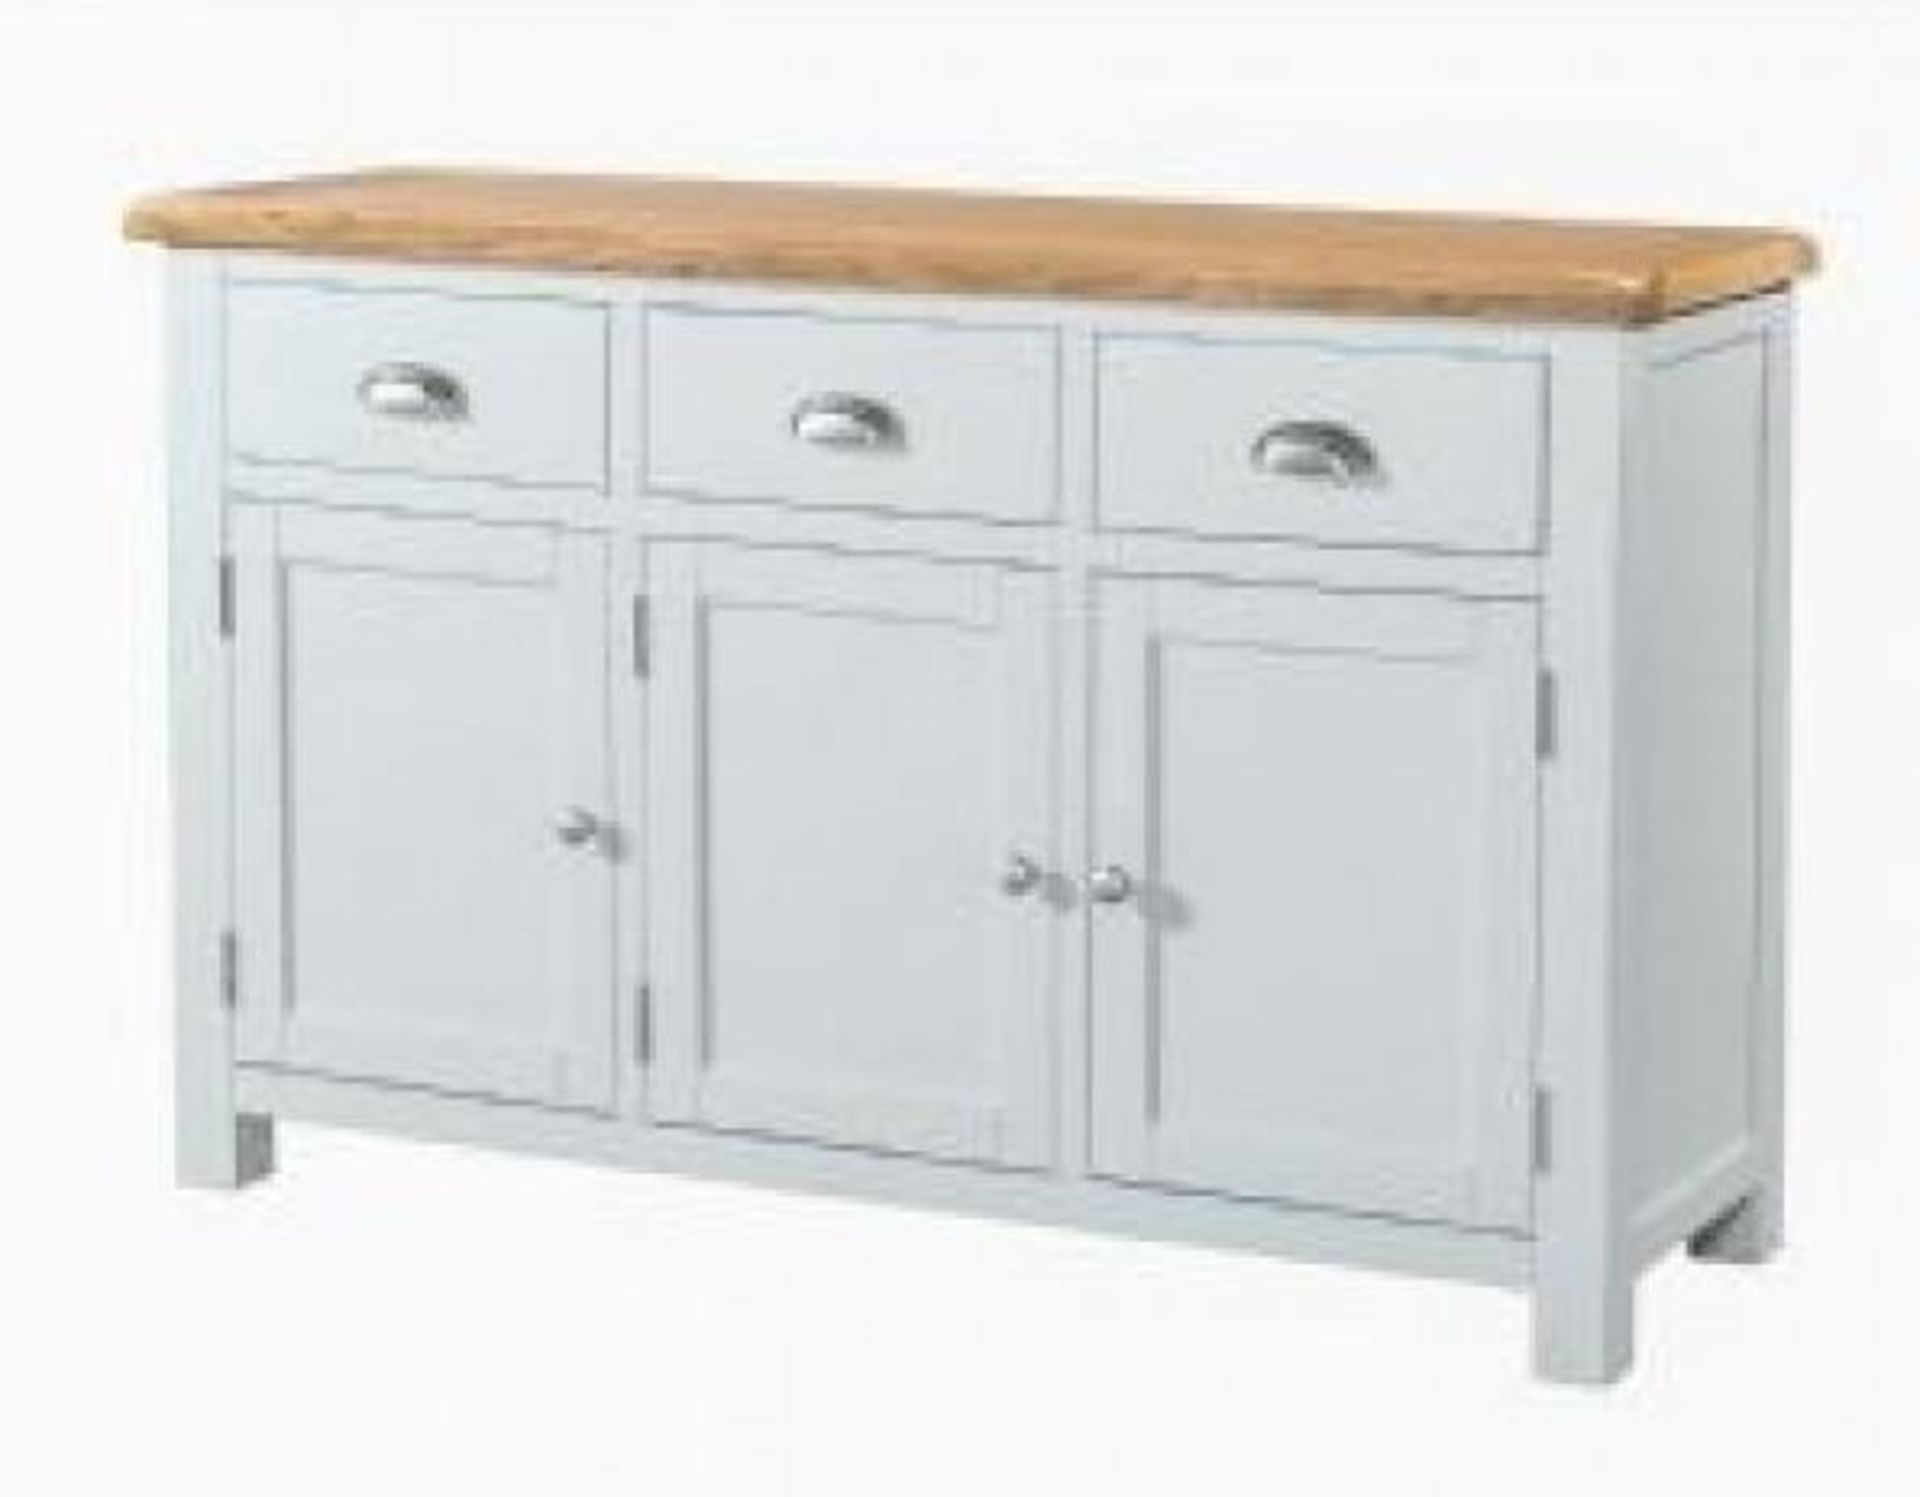 BRAND NEW & BOXED clevedon large sideboard